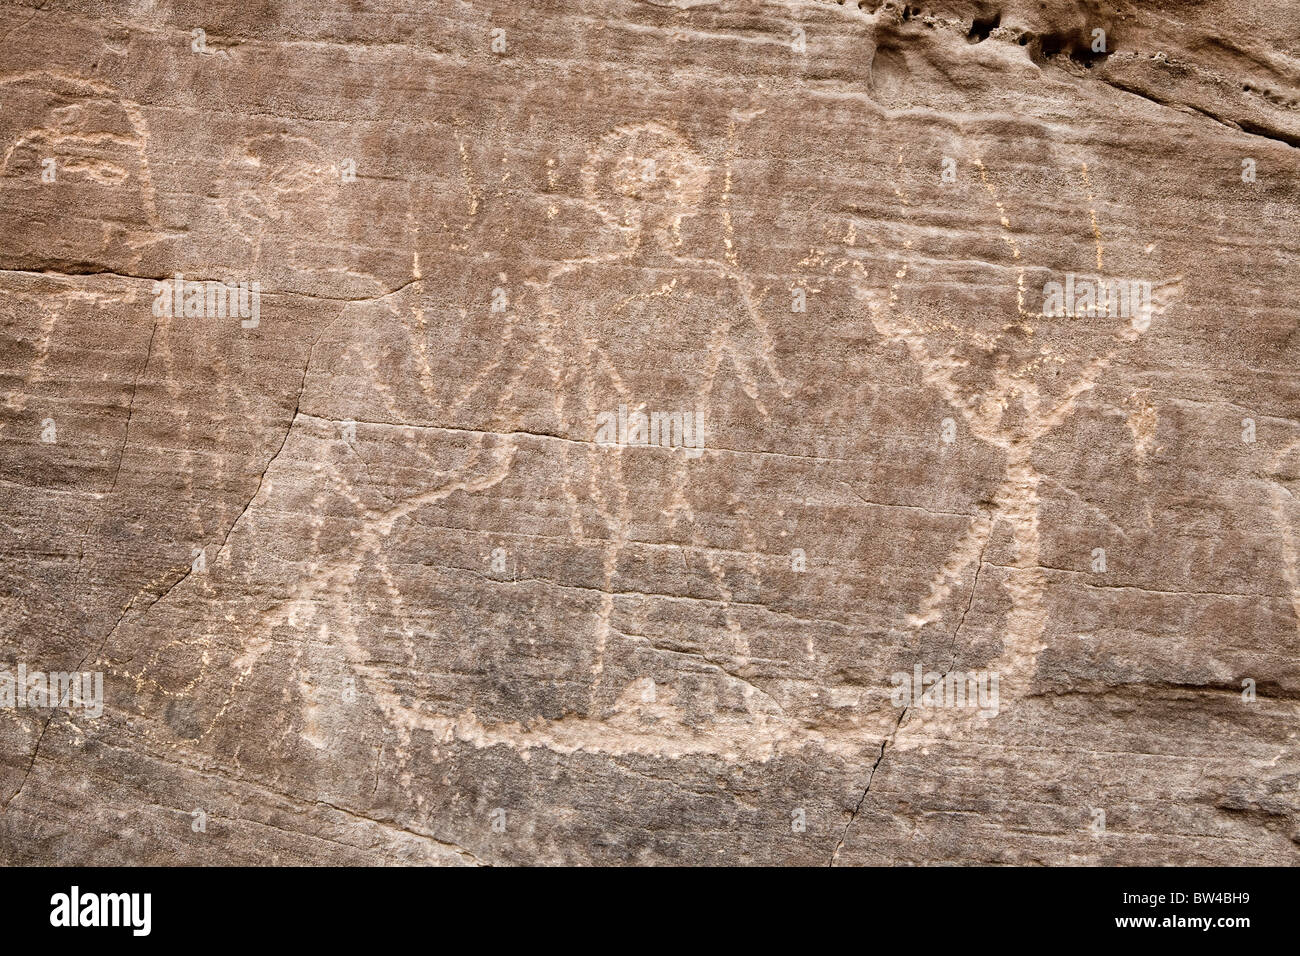 Petroglyph depicting men and a boat from dynastic period, Wadi Hammamat, Eastern Desert Egypt Stock Photo